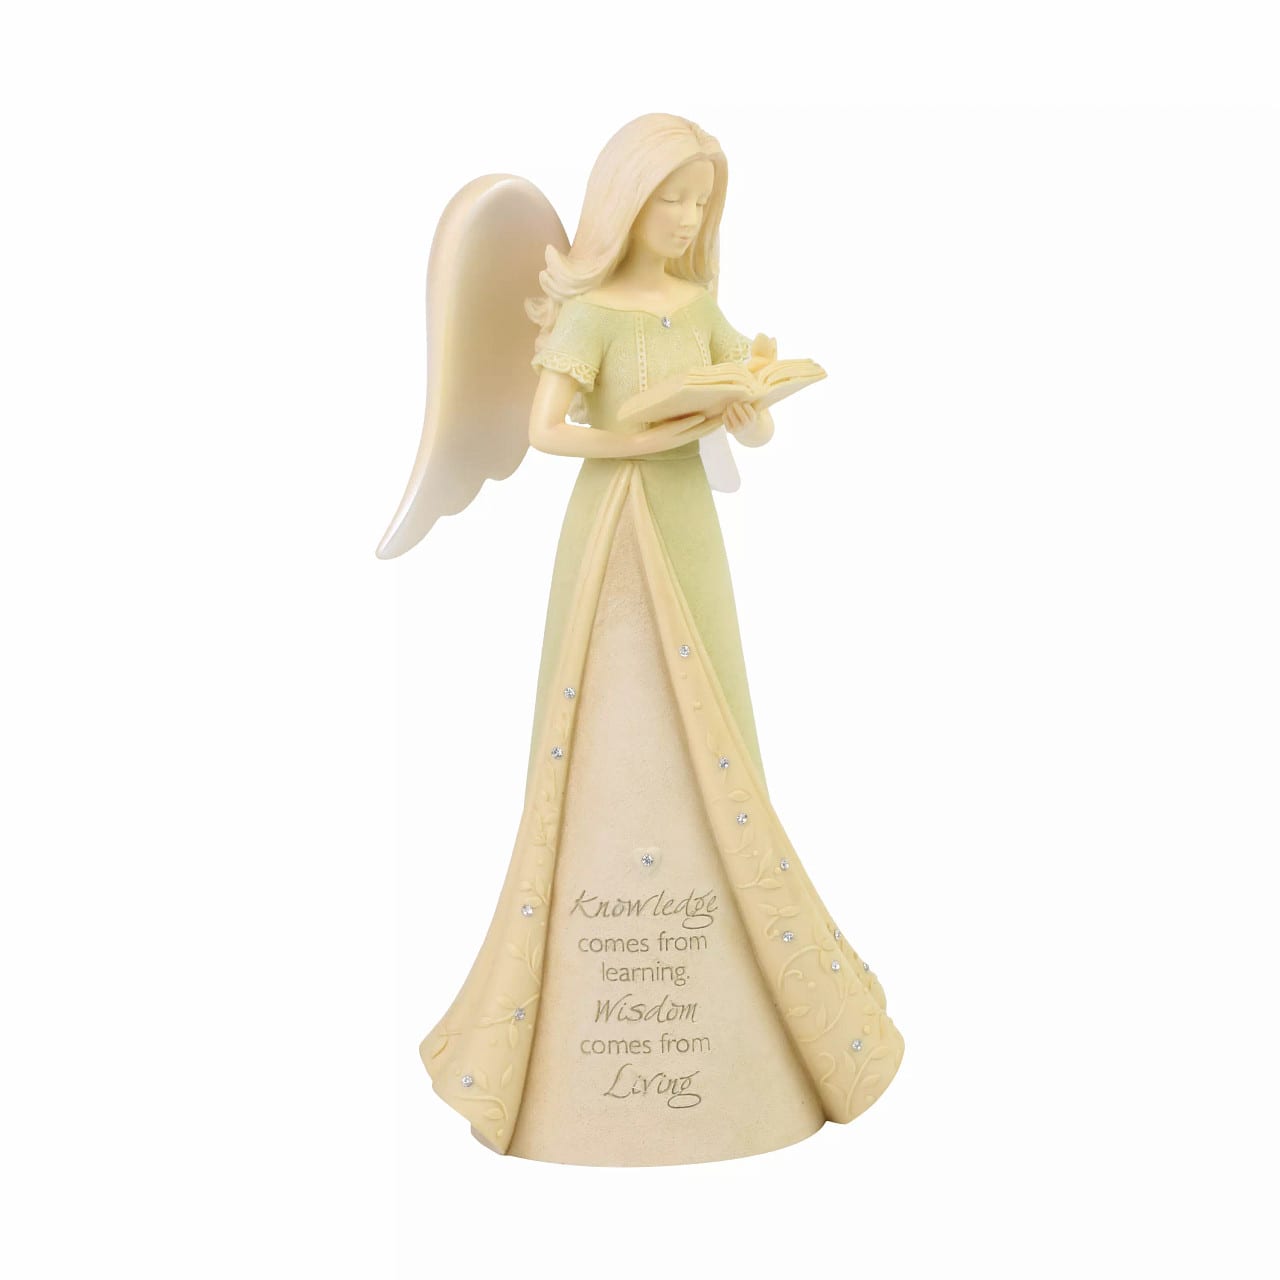 Foundations - Knowledge - resin angel 7 1/2&quot;. Angel is studded with small rhinestones. Imprinted saying on front of angel &quot;Knowledge comes from learning Wisdom comes from living&quot;